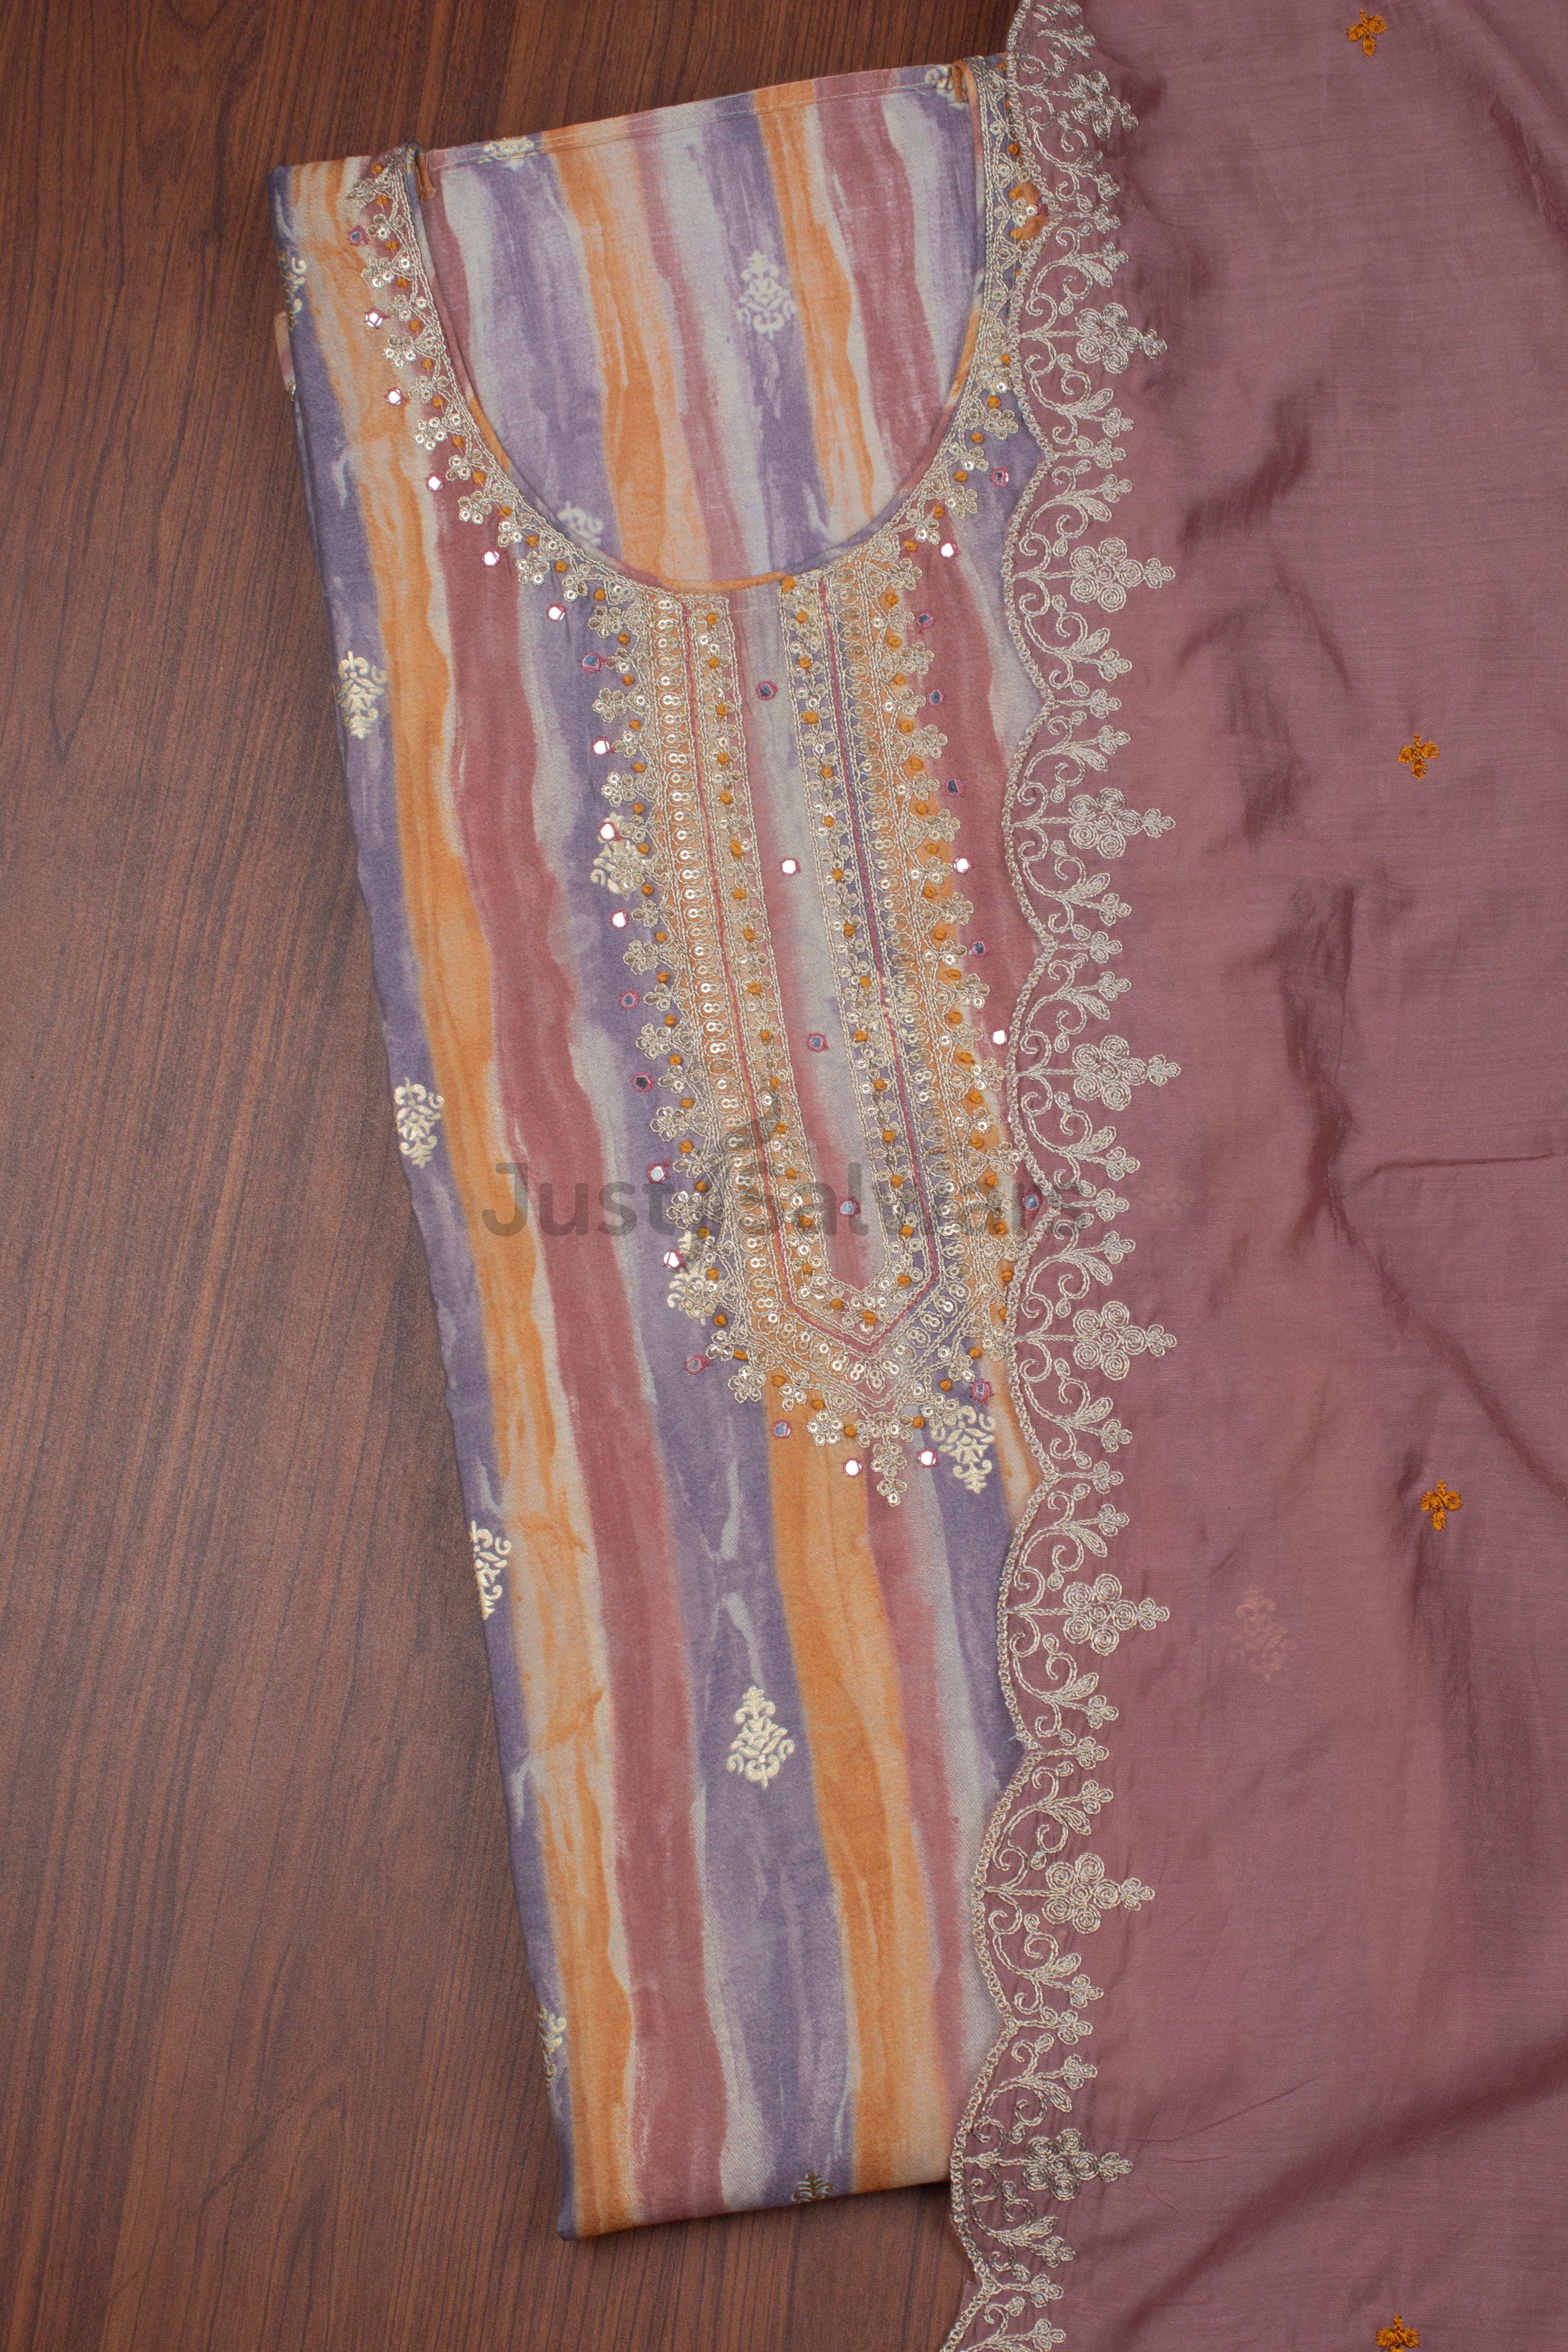 Onion Colour Unstitched Dress Material -Dress Material- Just Salwars